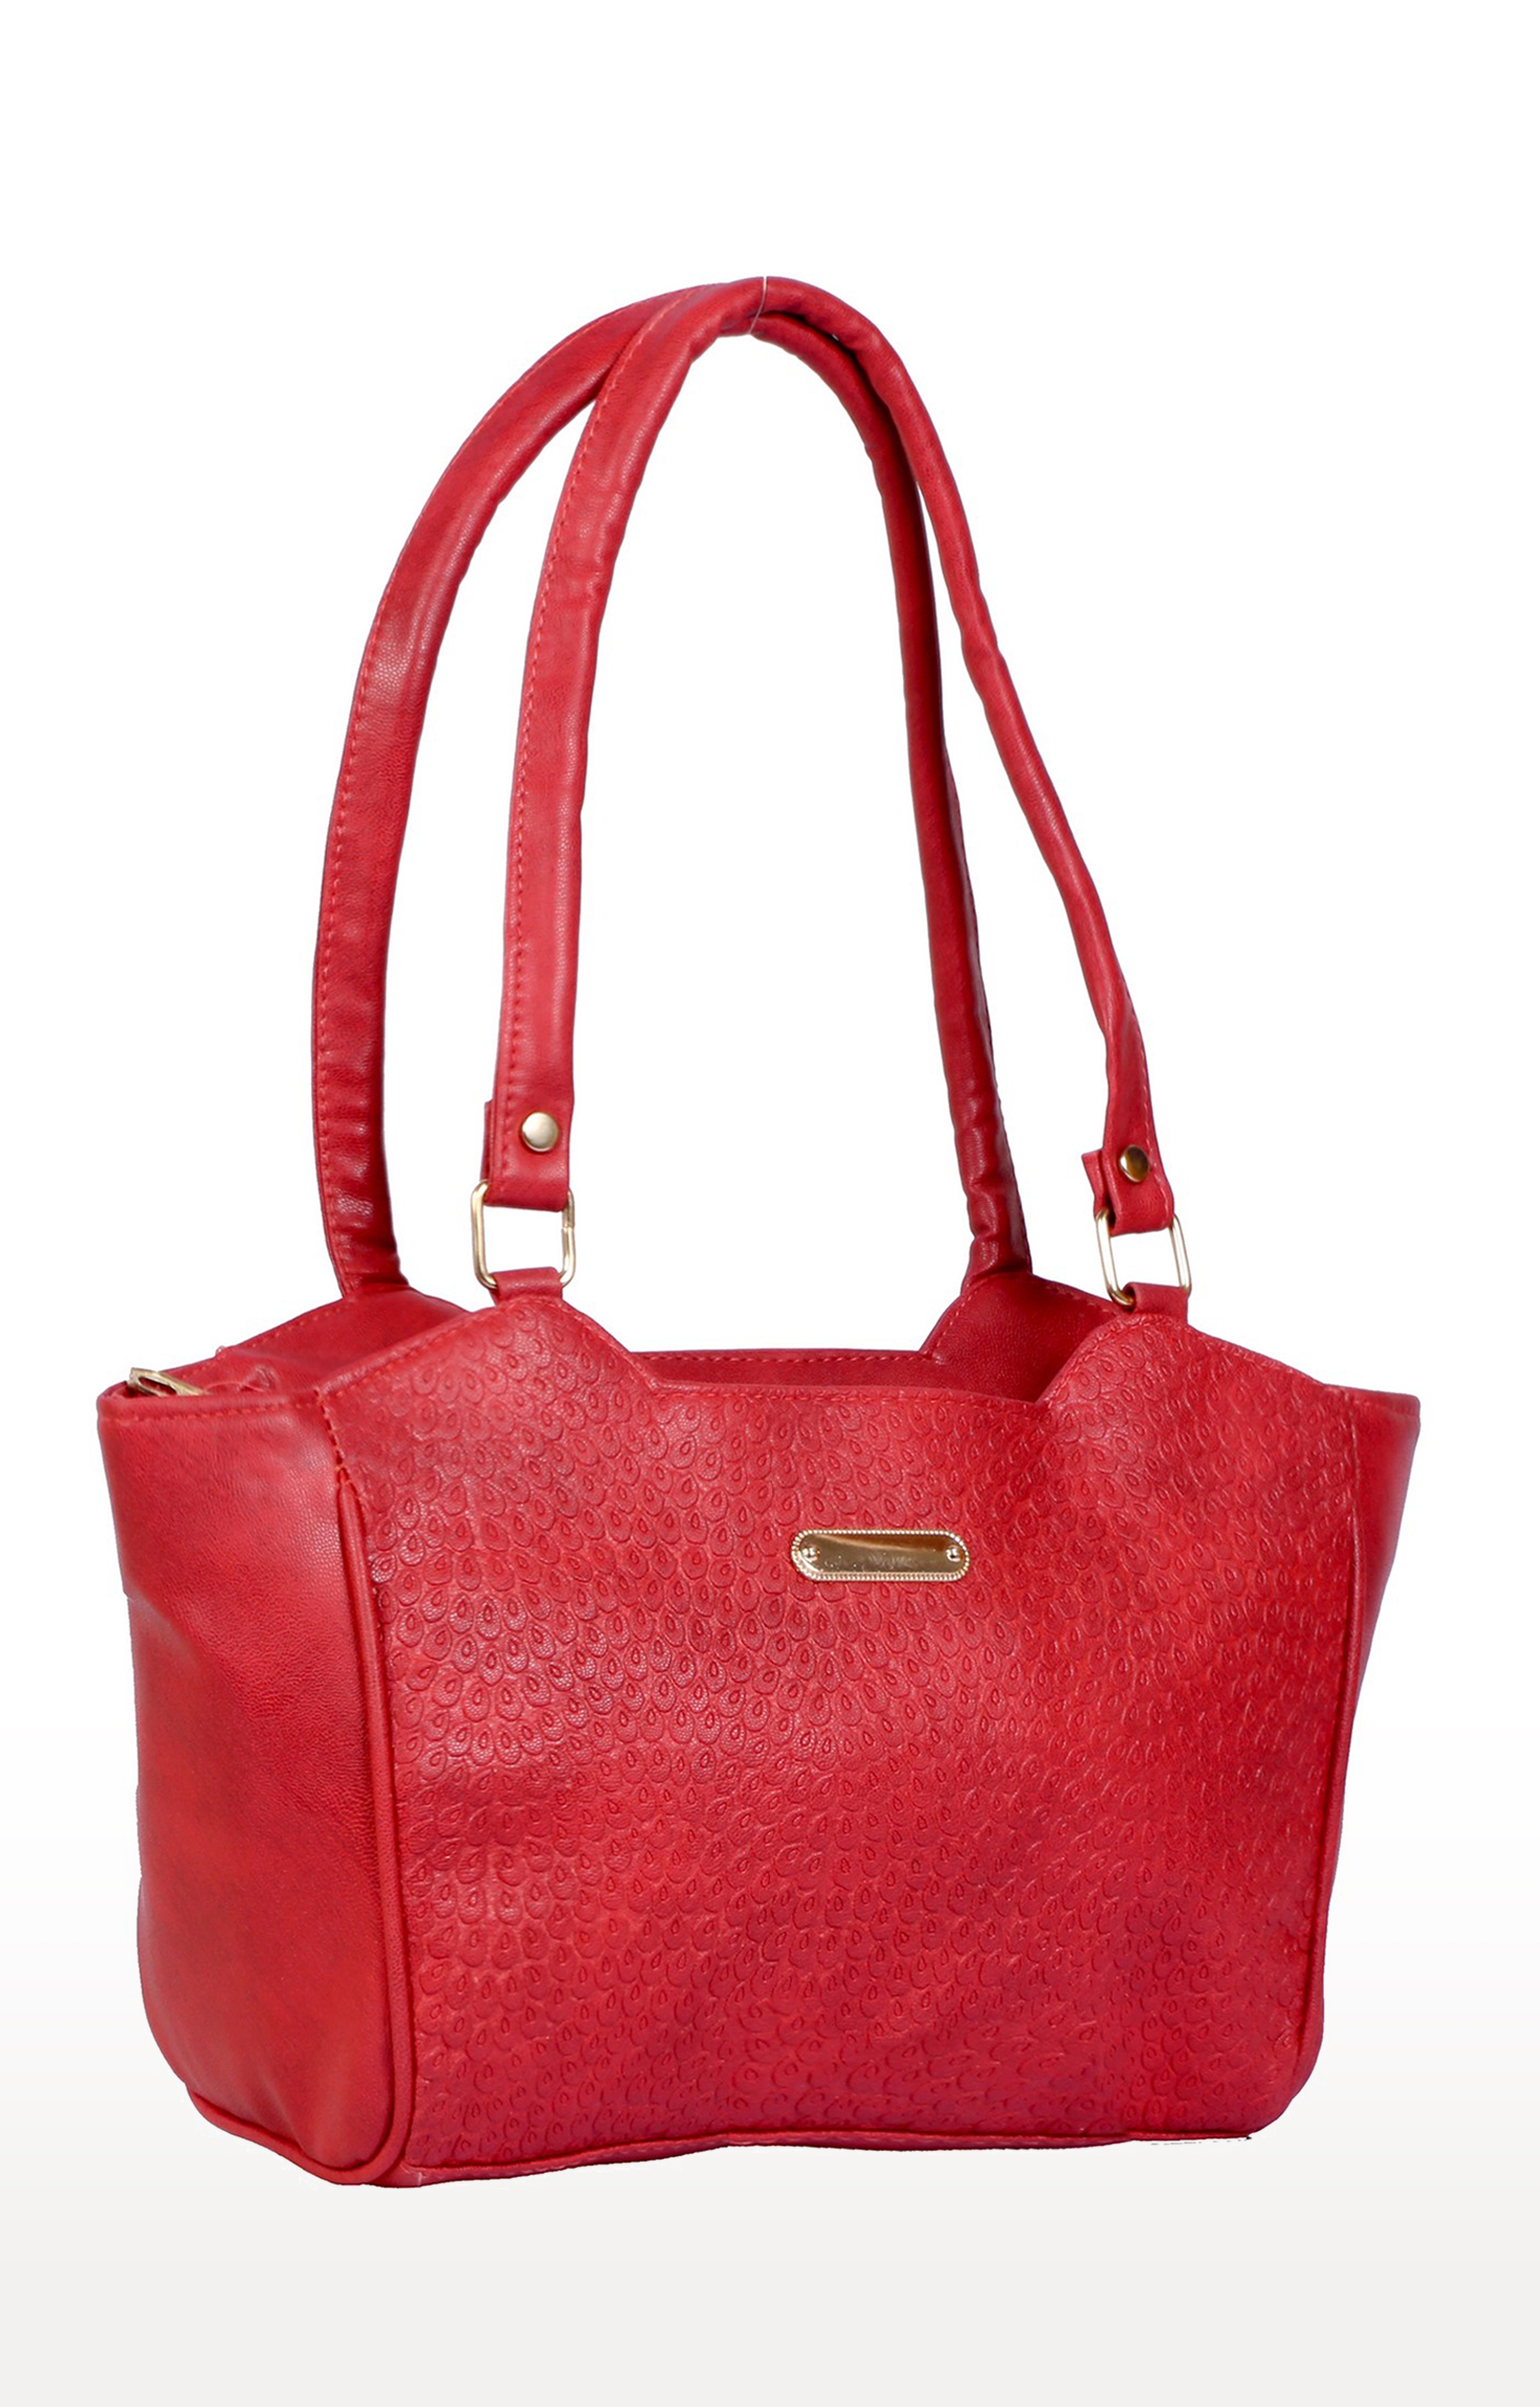 Lely's Beautiful Women's Handbag With Latest Shades -Pink